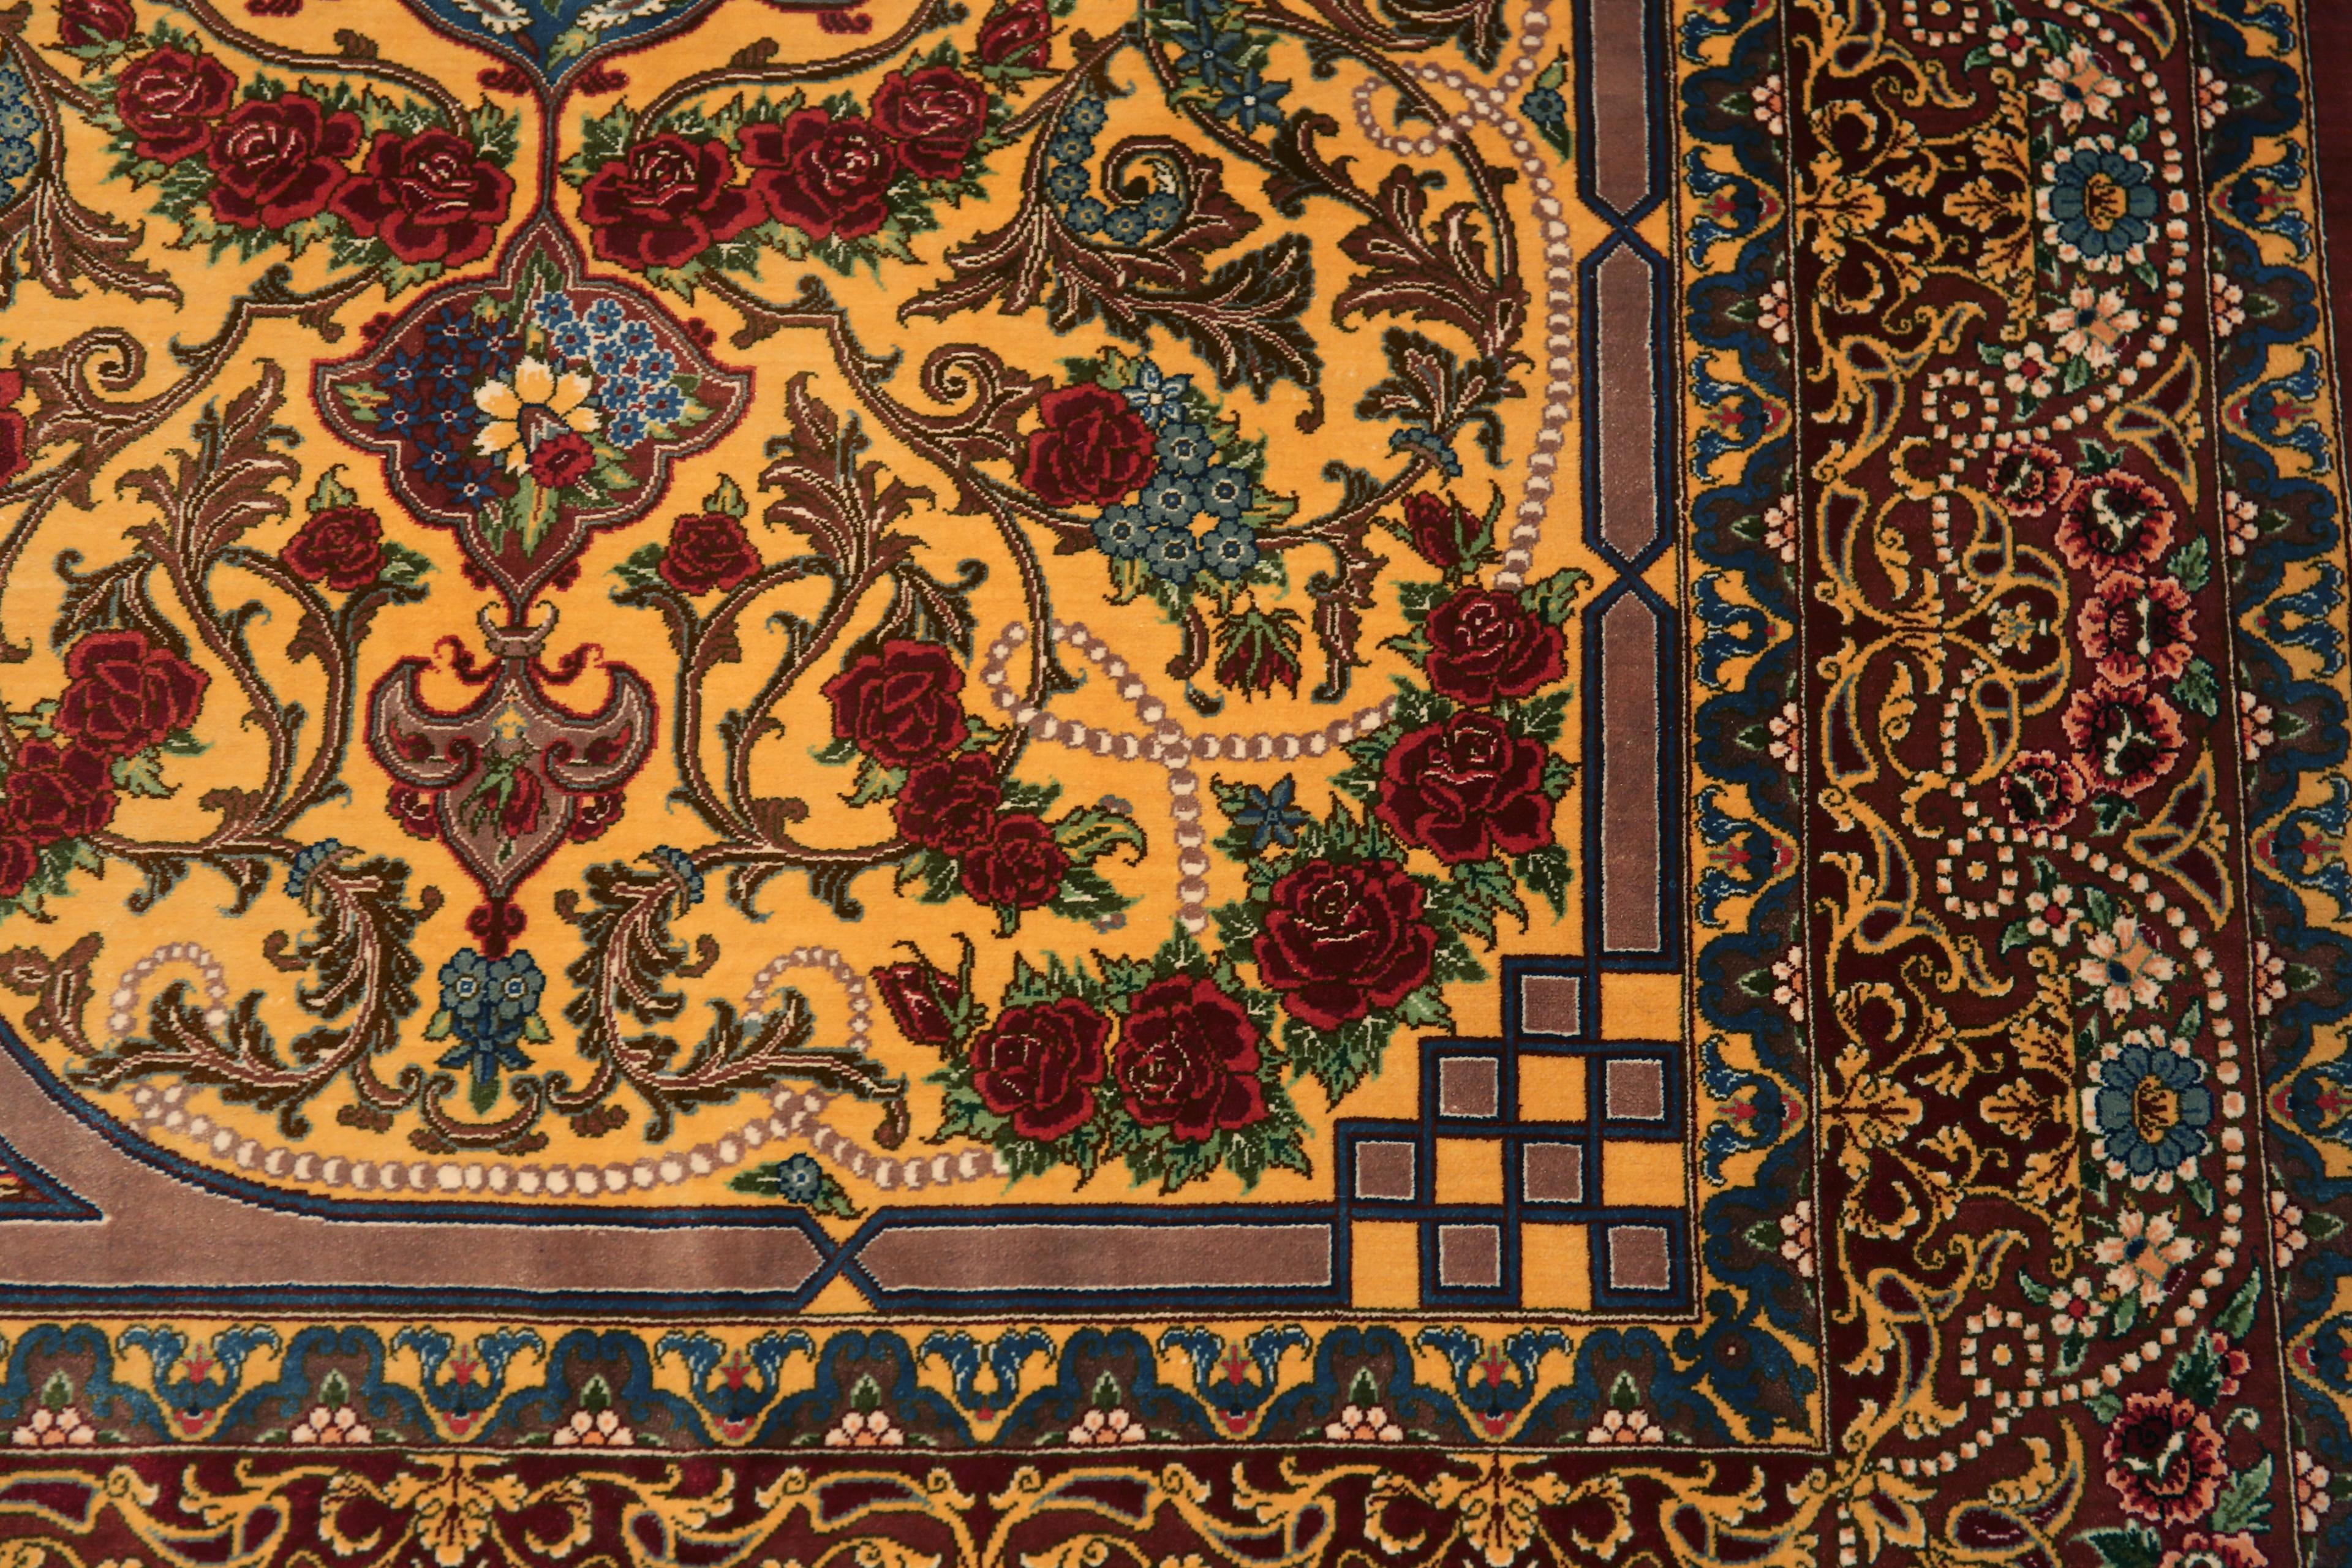 Hand-Knotted Fine Small Artistic Gold Color Luxurious Vintage Persian Silk Qum Rug 3'4